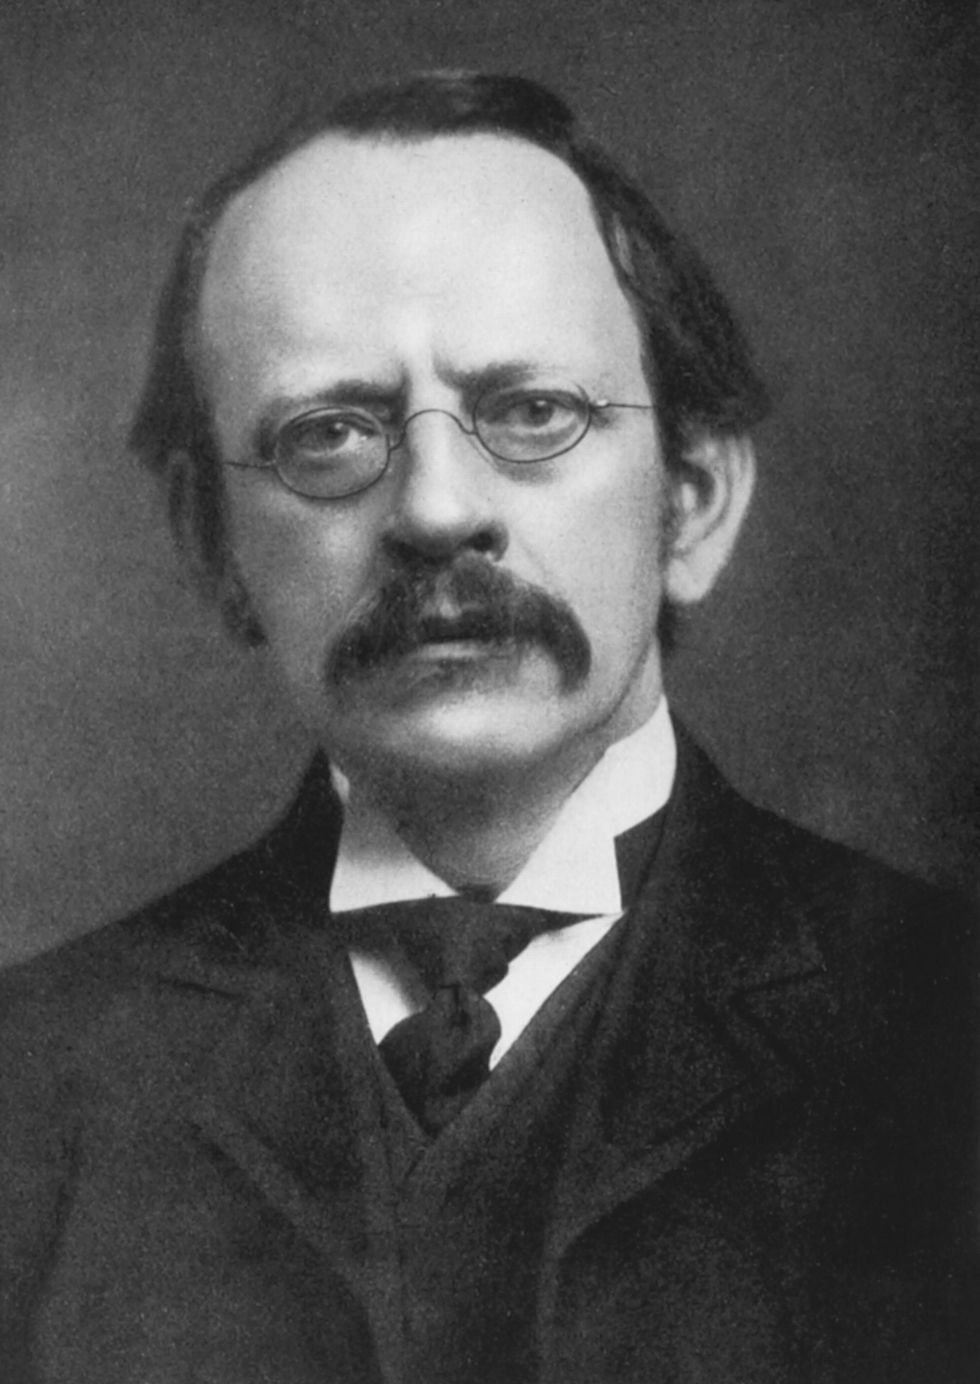 In a black-and-white image of the British physicist J.J. Thomson, he has a dark mustache and wire-rimmed glasses.